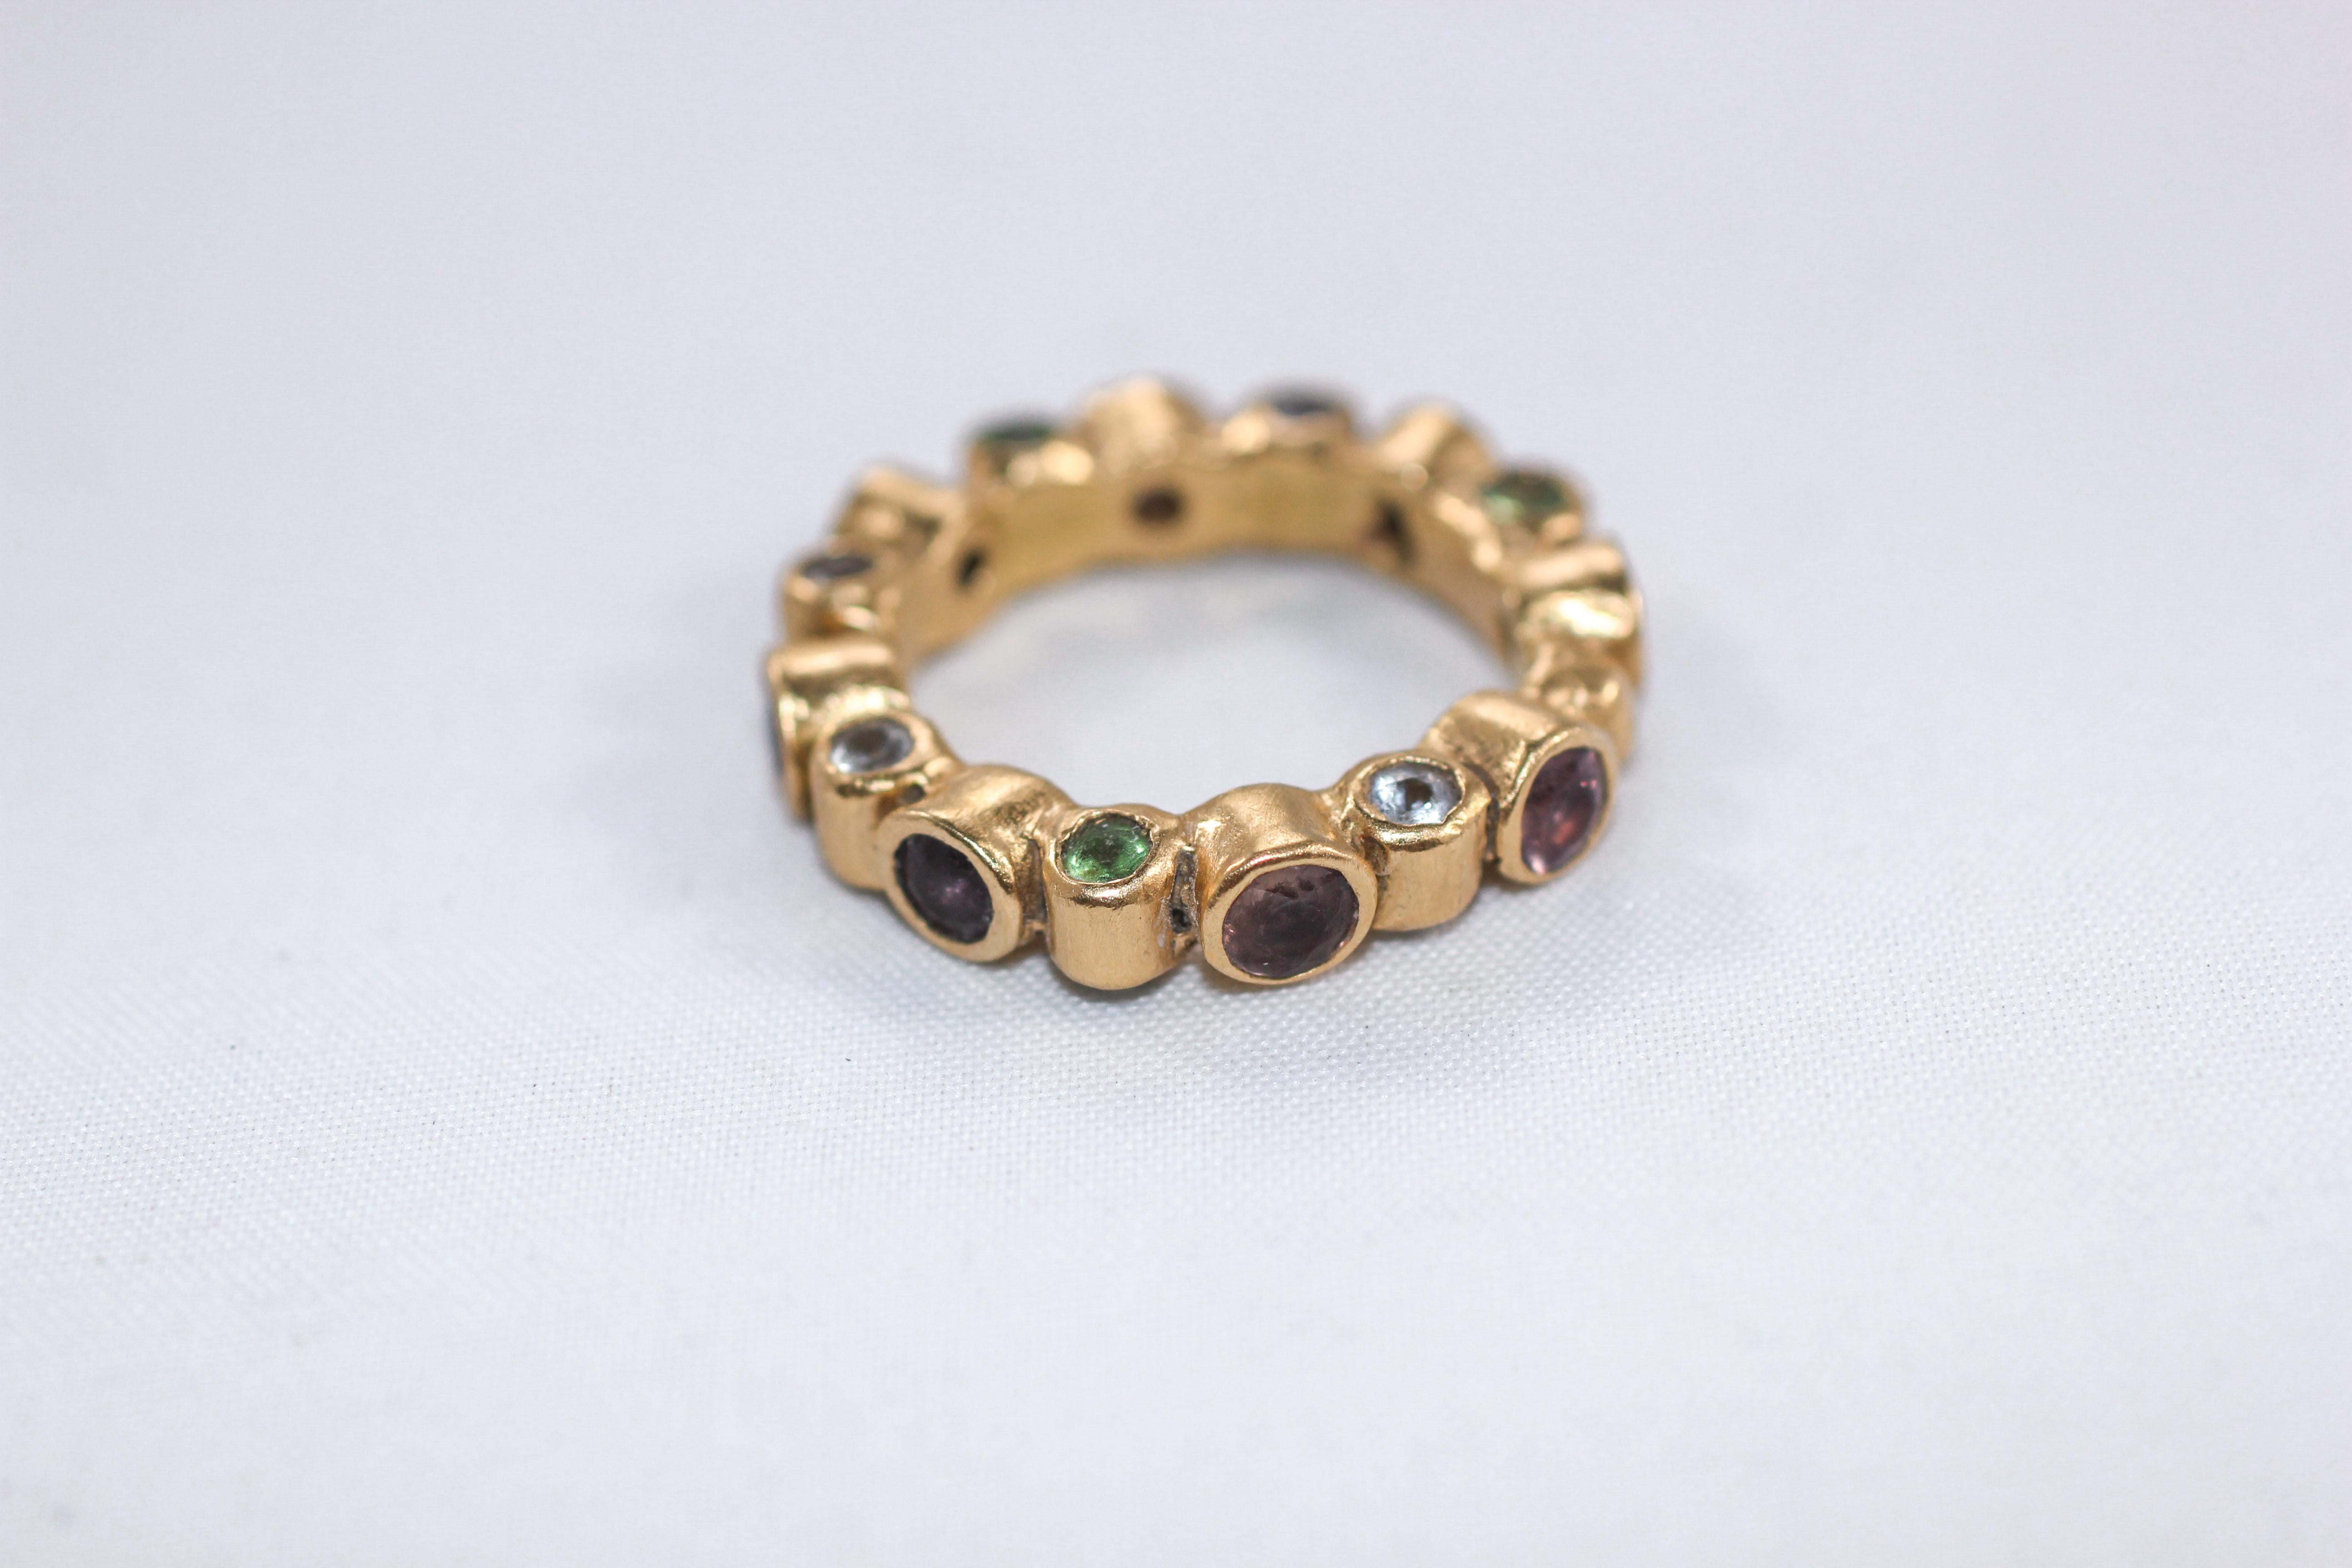 Cylinder Ring. An unusual bezel wedding or a cocktail band or a fashion ring, set on all three sides. This listing is for the ring set with pink and white sapphires, tanzanites, and tsavorites, brilliant cut stones. Like a sculpture, it appears